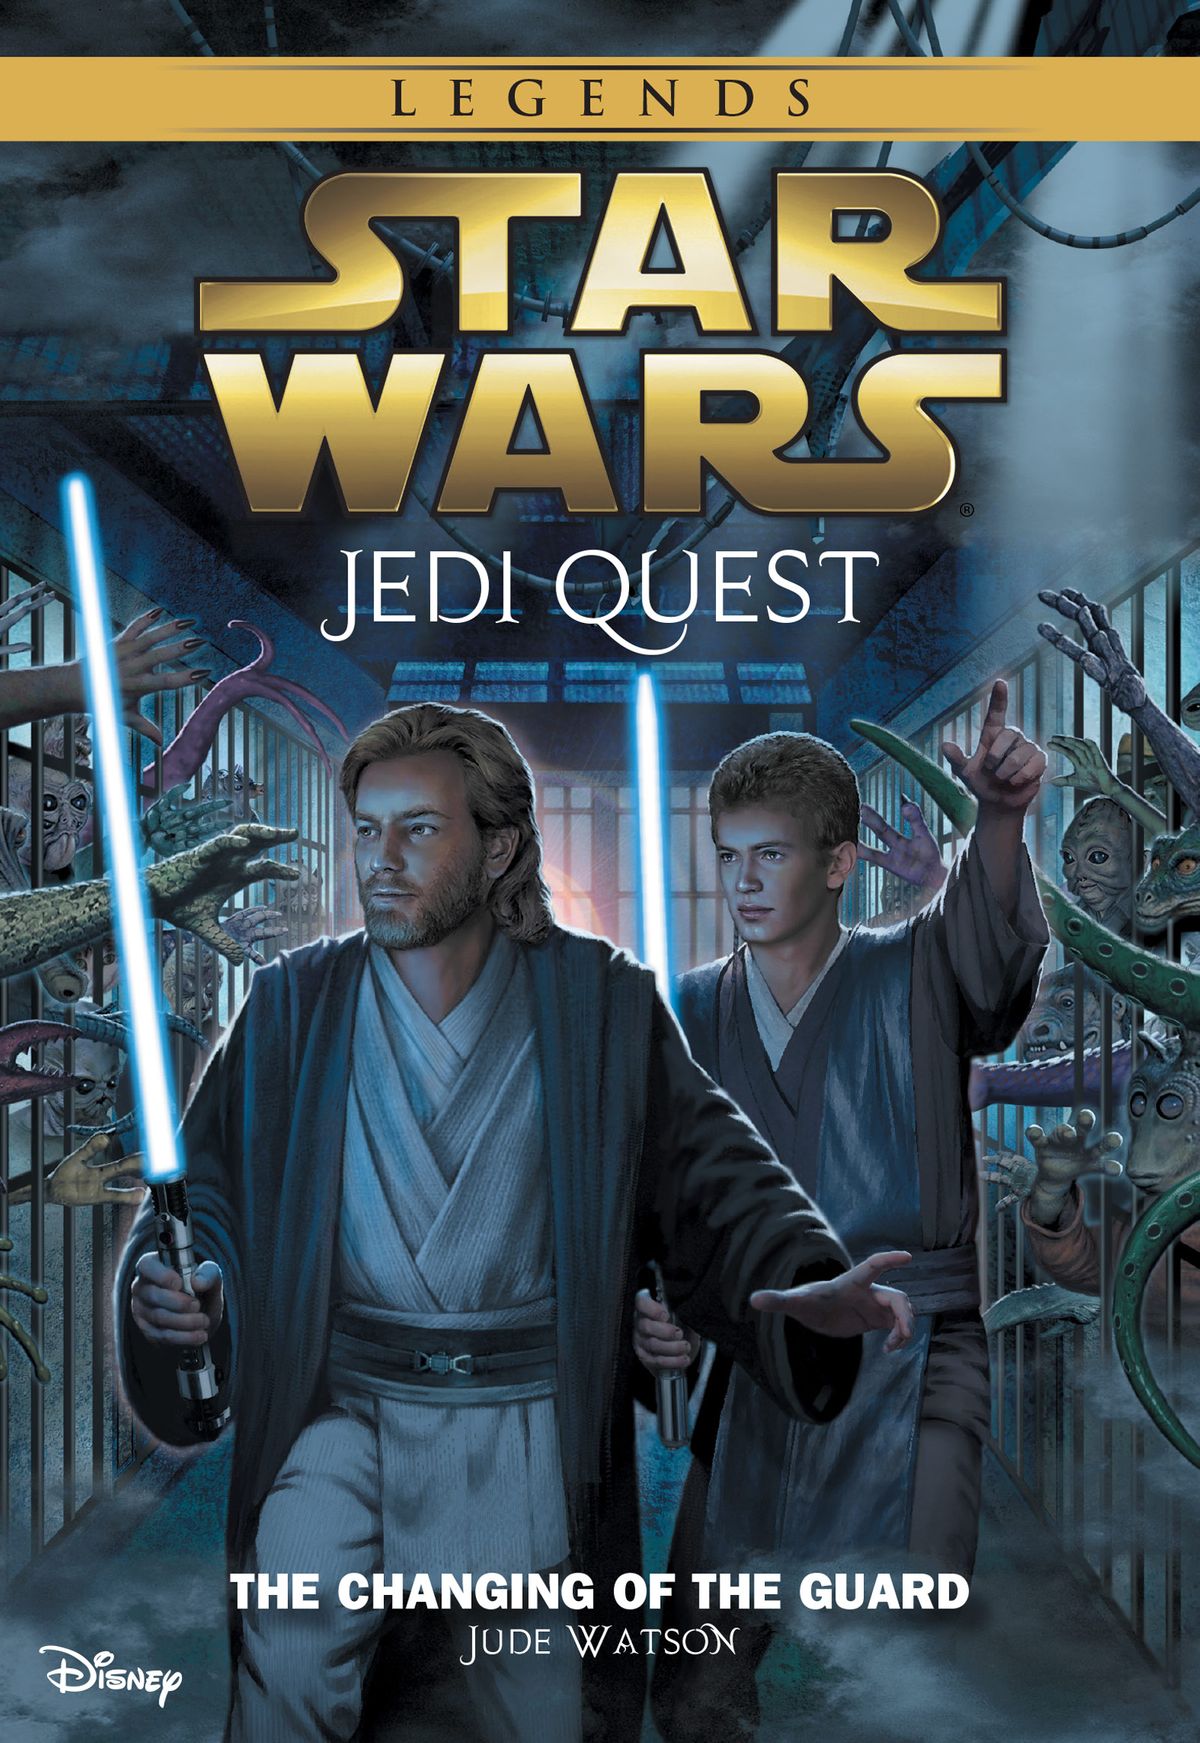 Jedi Quest: The Changing of the Guard